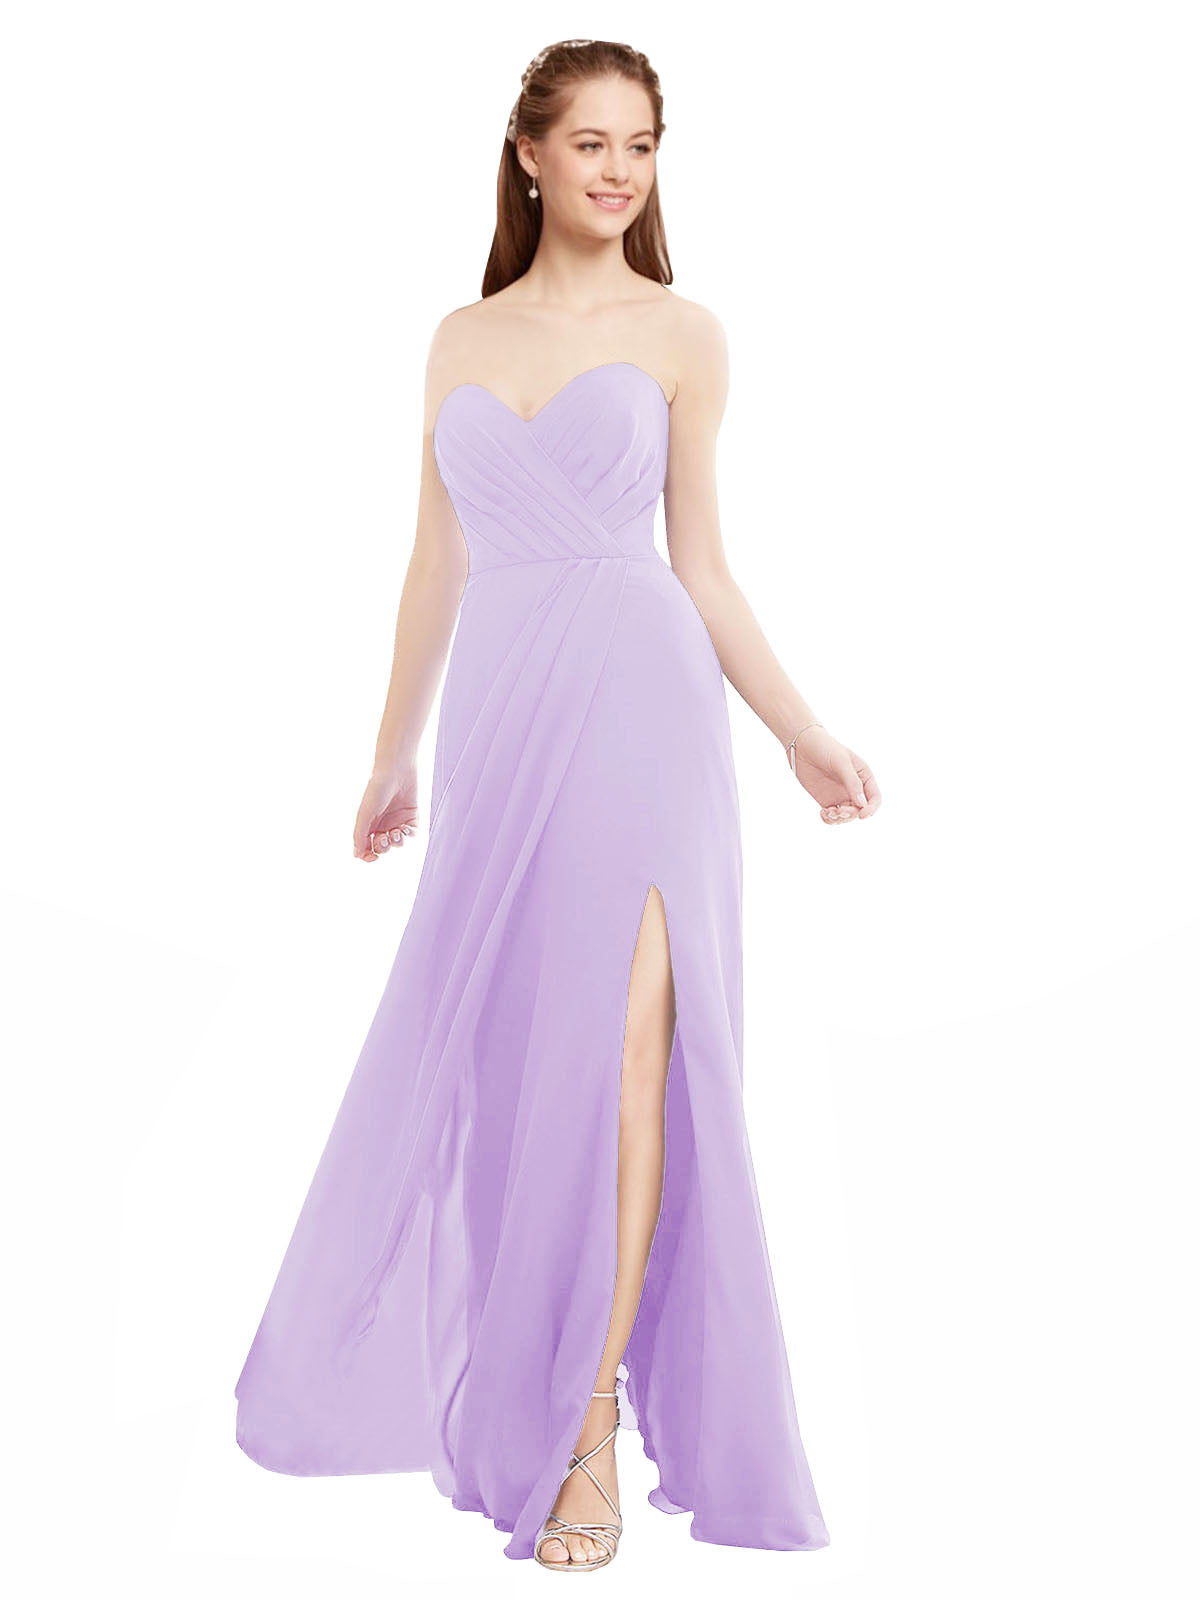 Lilac A-Line Sweetheart Strapless Sleeveless Long Bridesmaid Dress Meadow